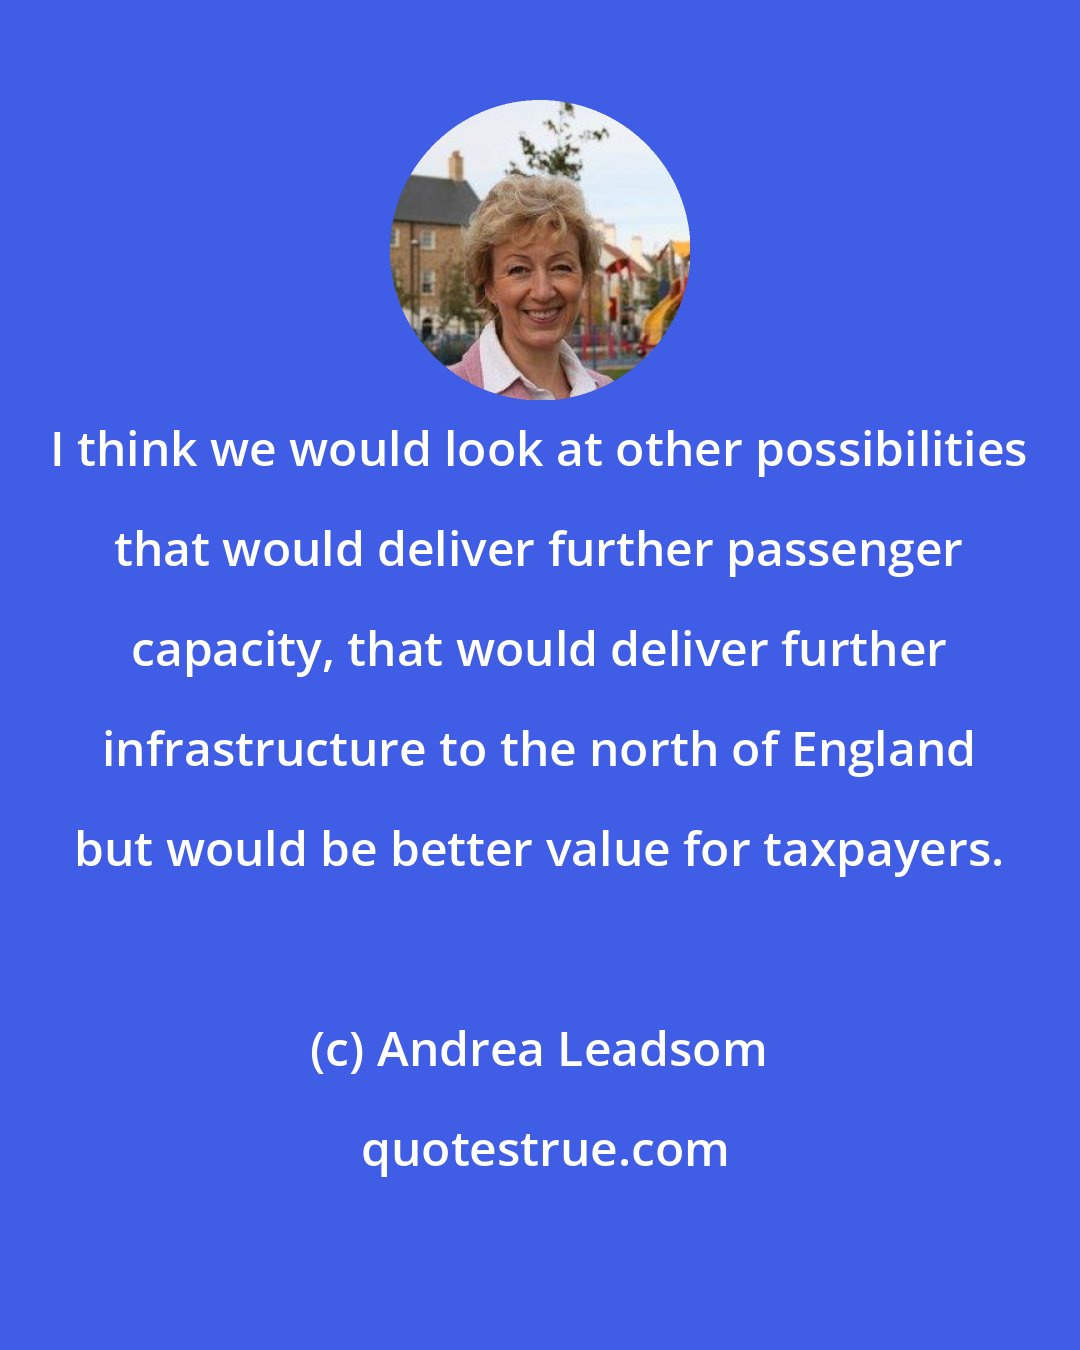 Andrea Leadsom: I think we would look at other possibilities that would deliver further passenger capacity, that would deliver further infrastructure to the north of England but would be better value for taxpayers.